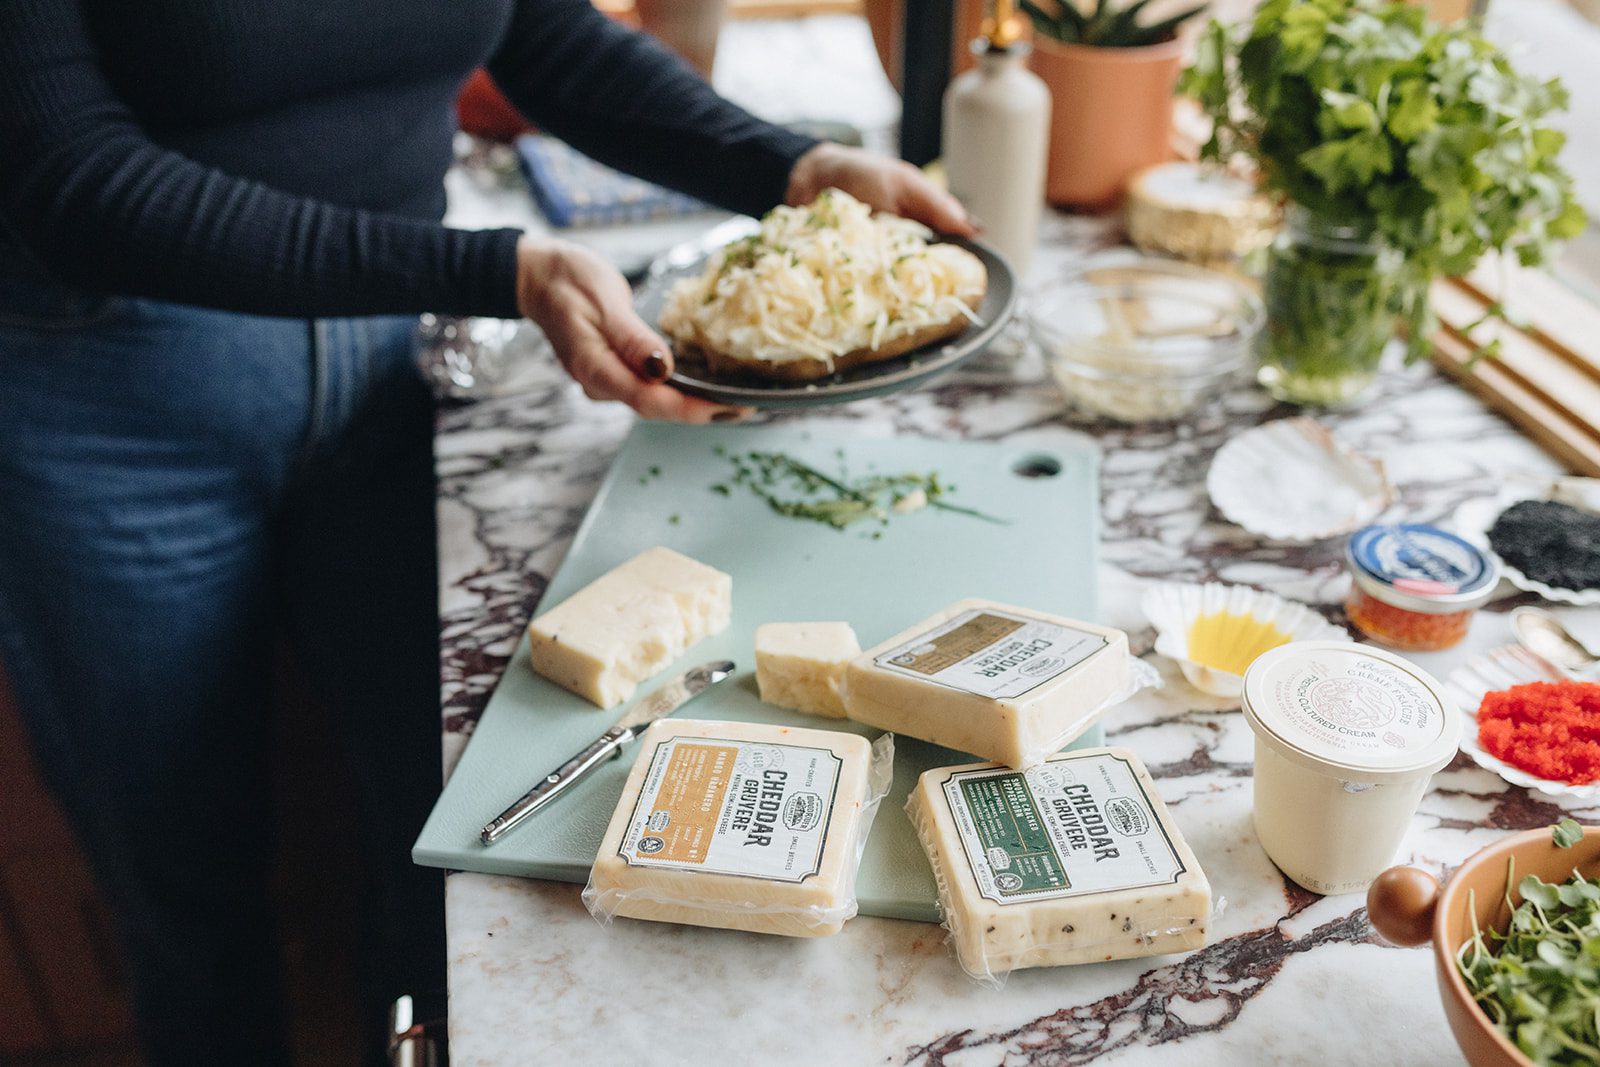 Woman prepares a meal in the kitchen with a variety of cheeses in the lead.